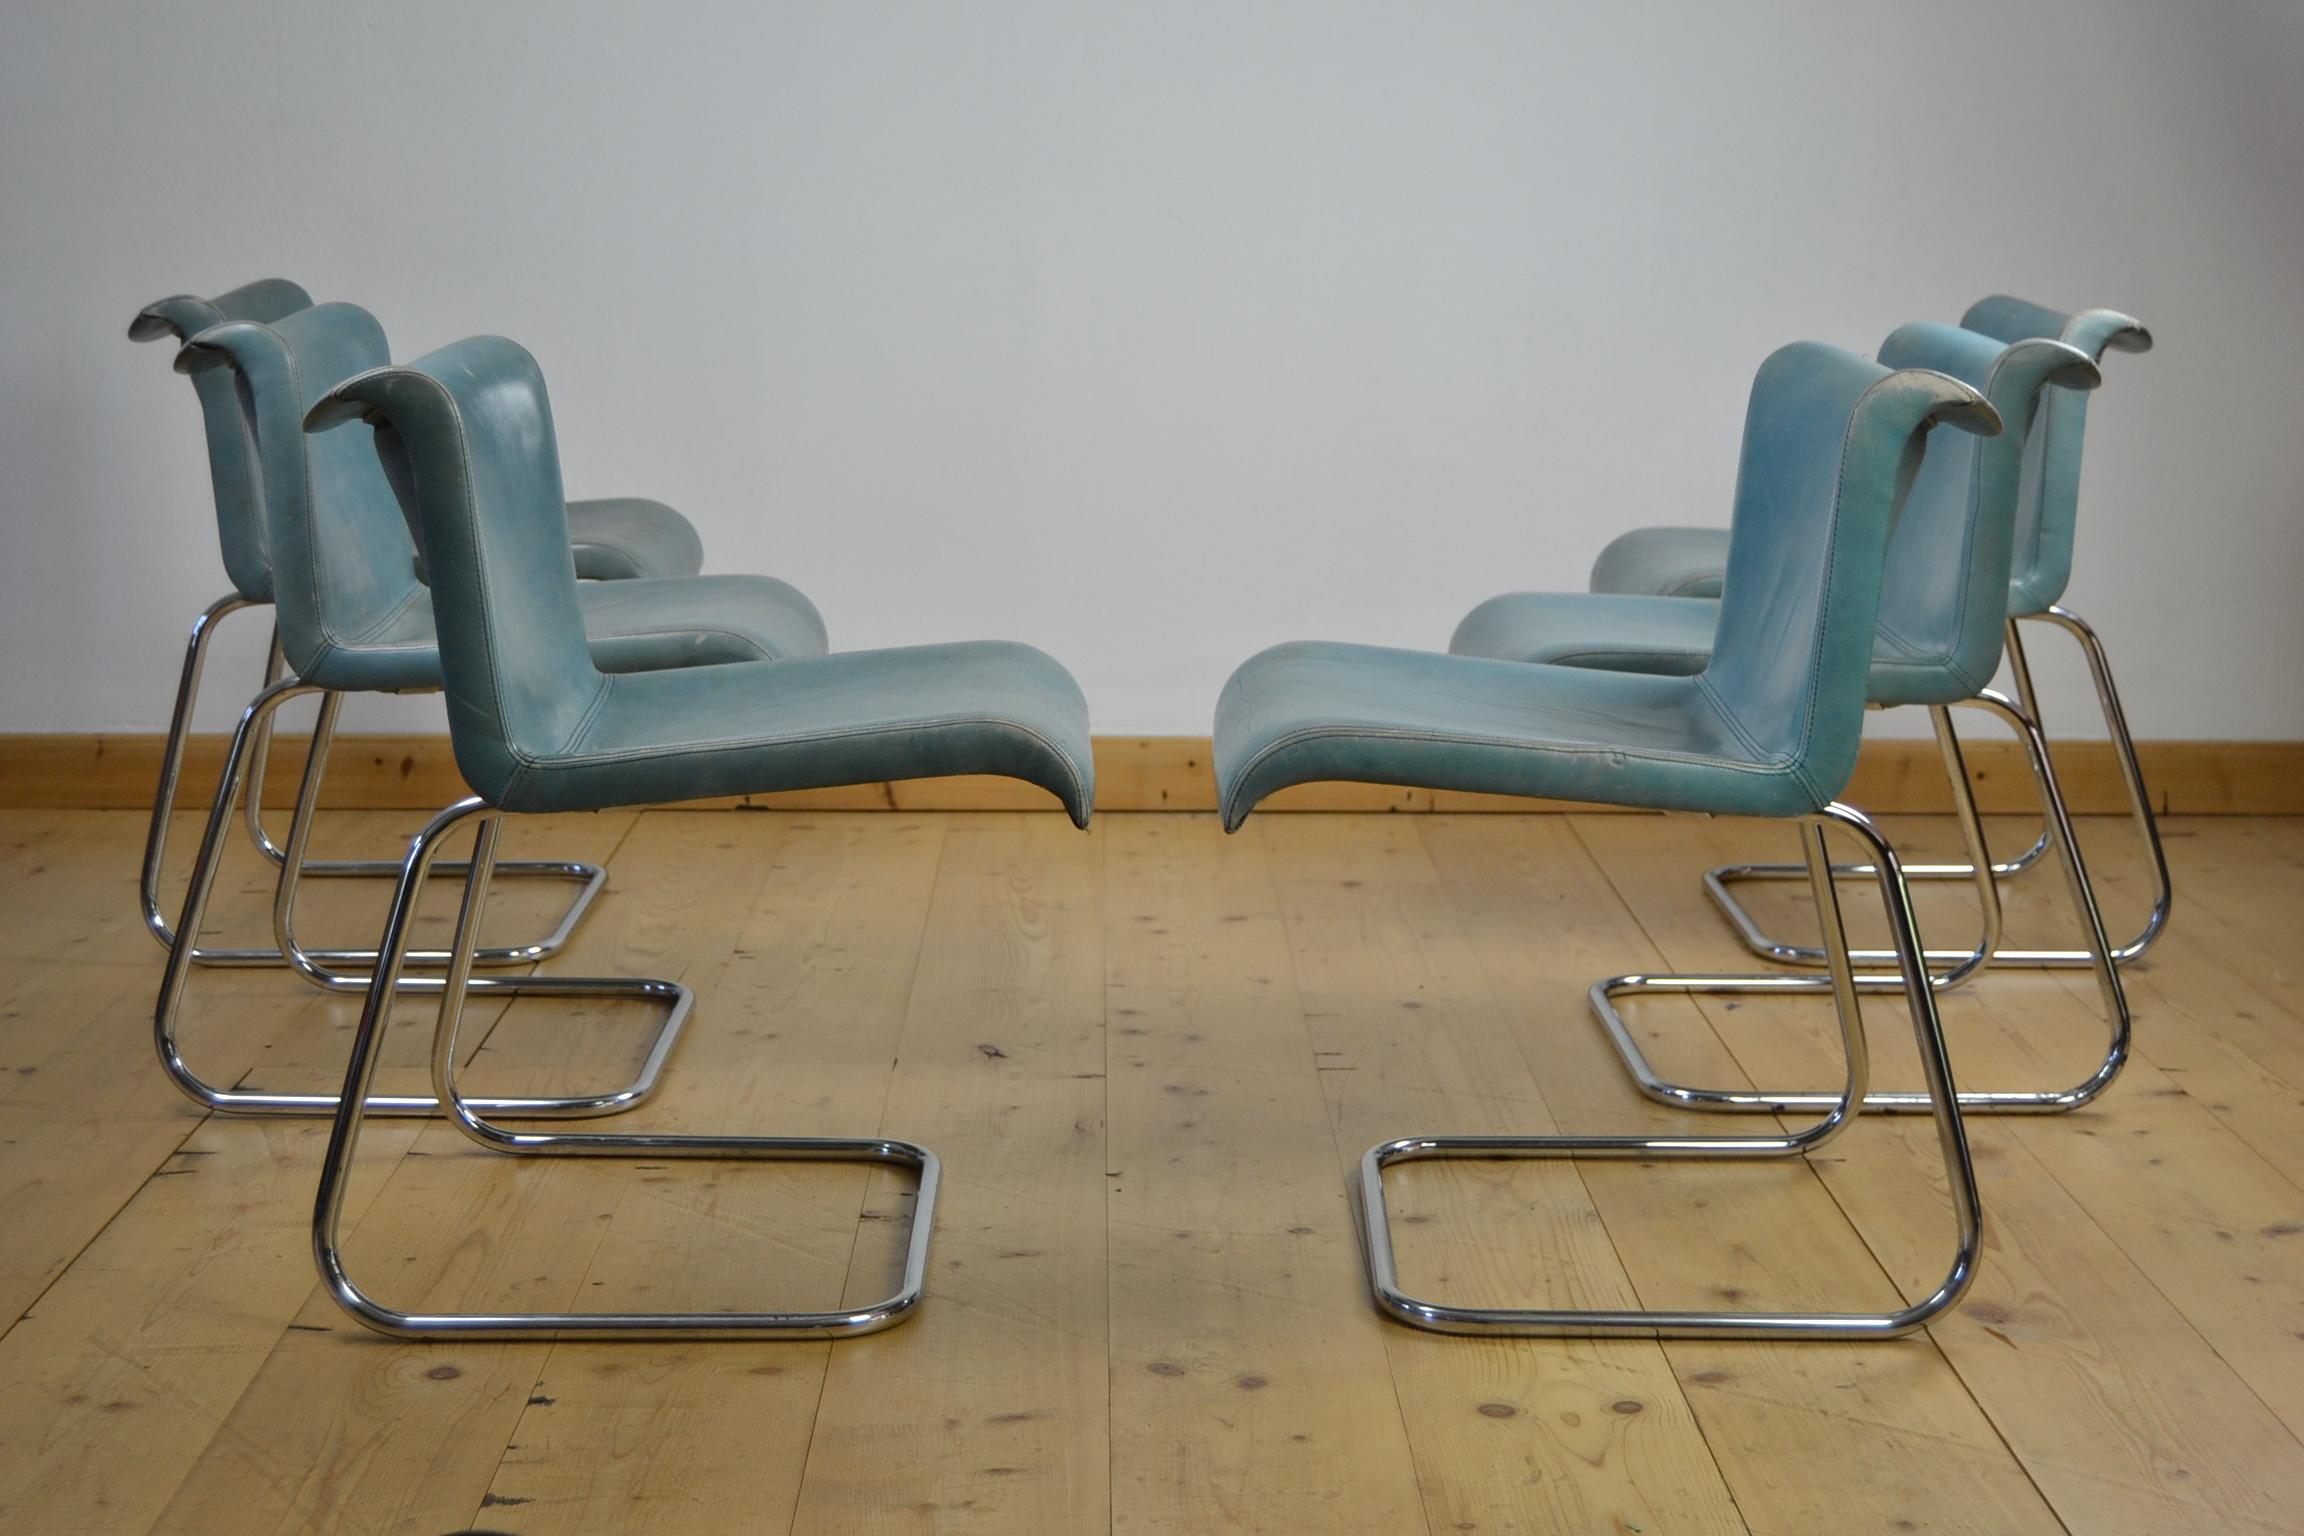 blue leather dining chairs